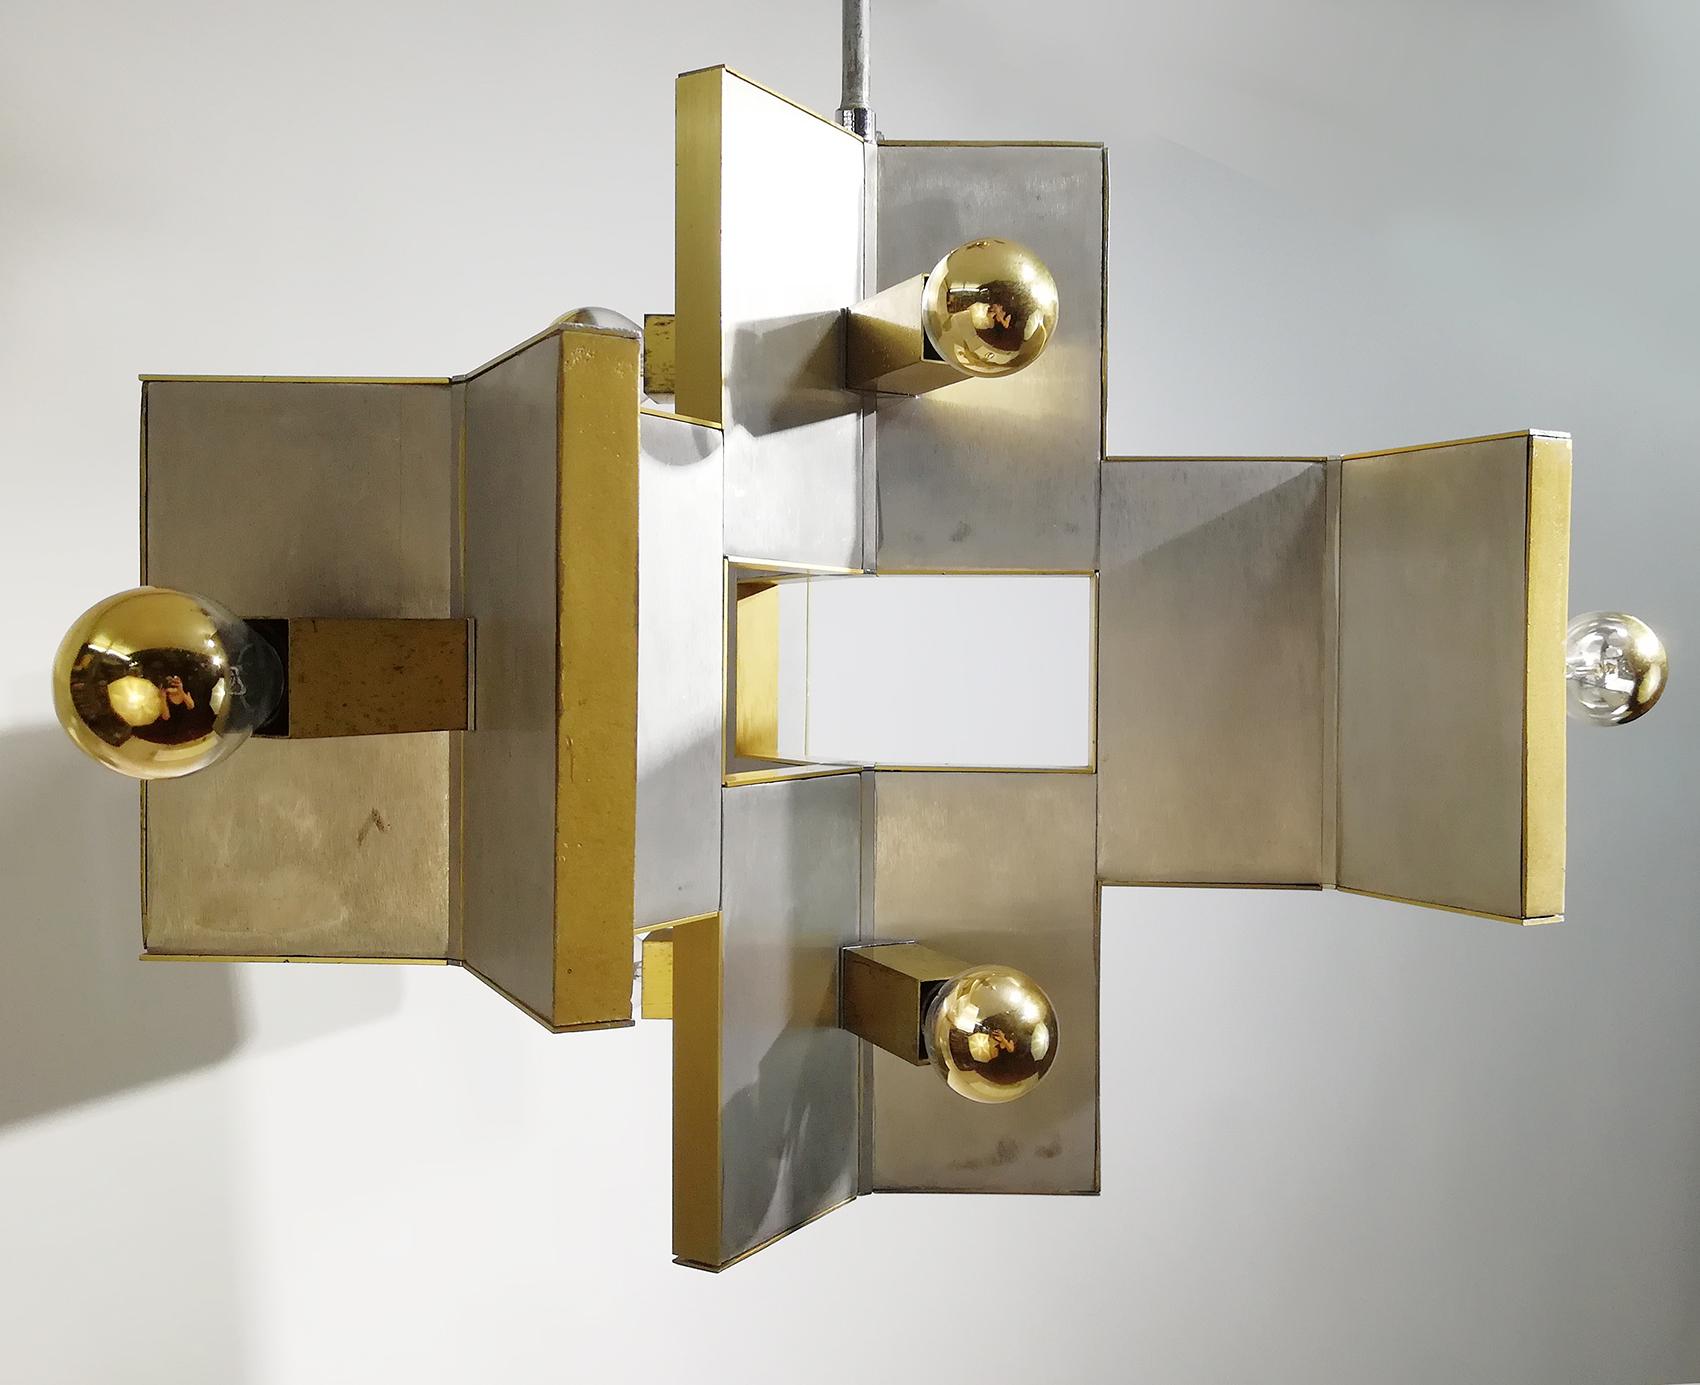 Geometric Gaetano Sciolari brass and mirrored metal chandelier featuring nine sockets each for 60 watts for a total of 540 watts.
Delivered and wired for American or European use.
Gaetano Sciolari was an Italian designer known for his Mid-Century